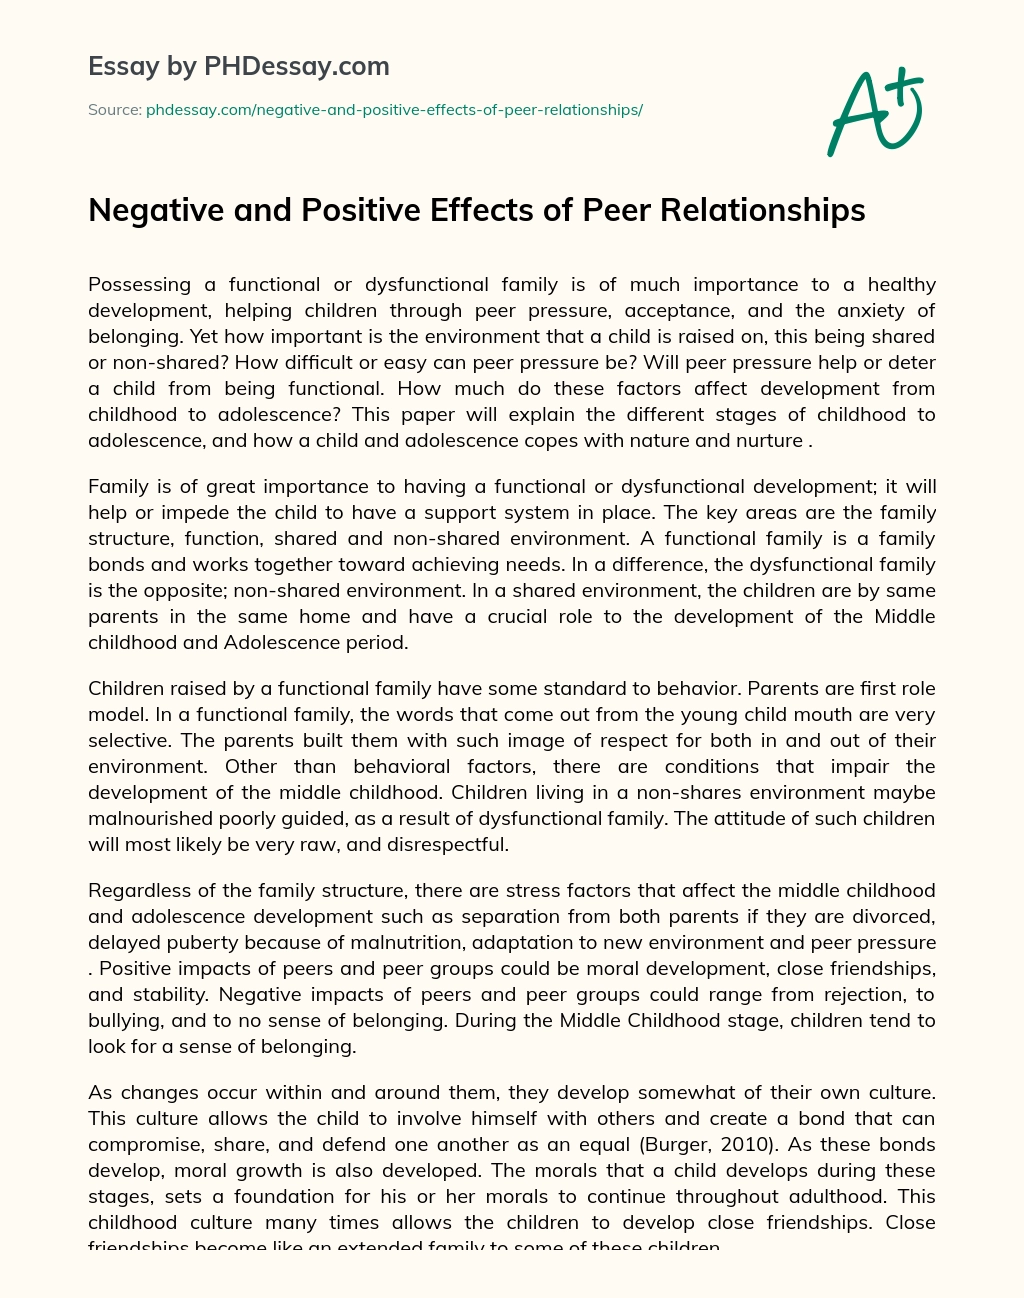 Negative and Positive Effects of Peer Relationships essay